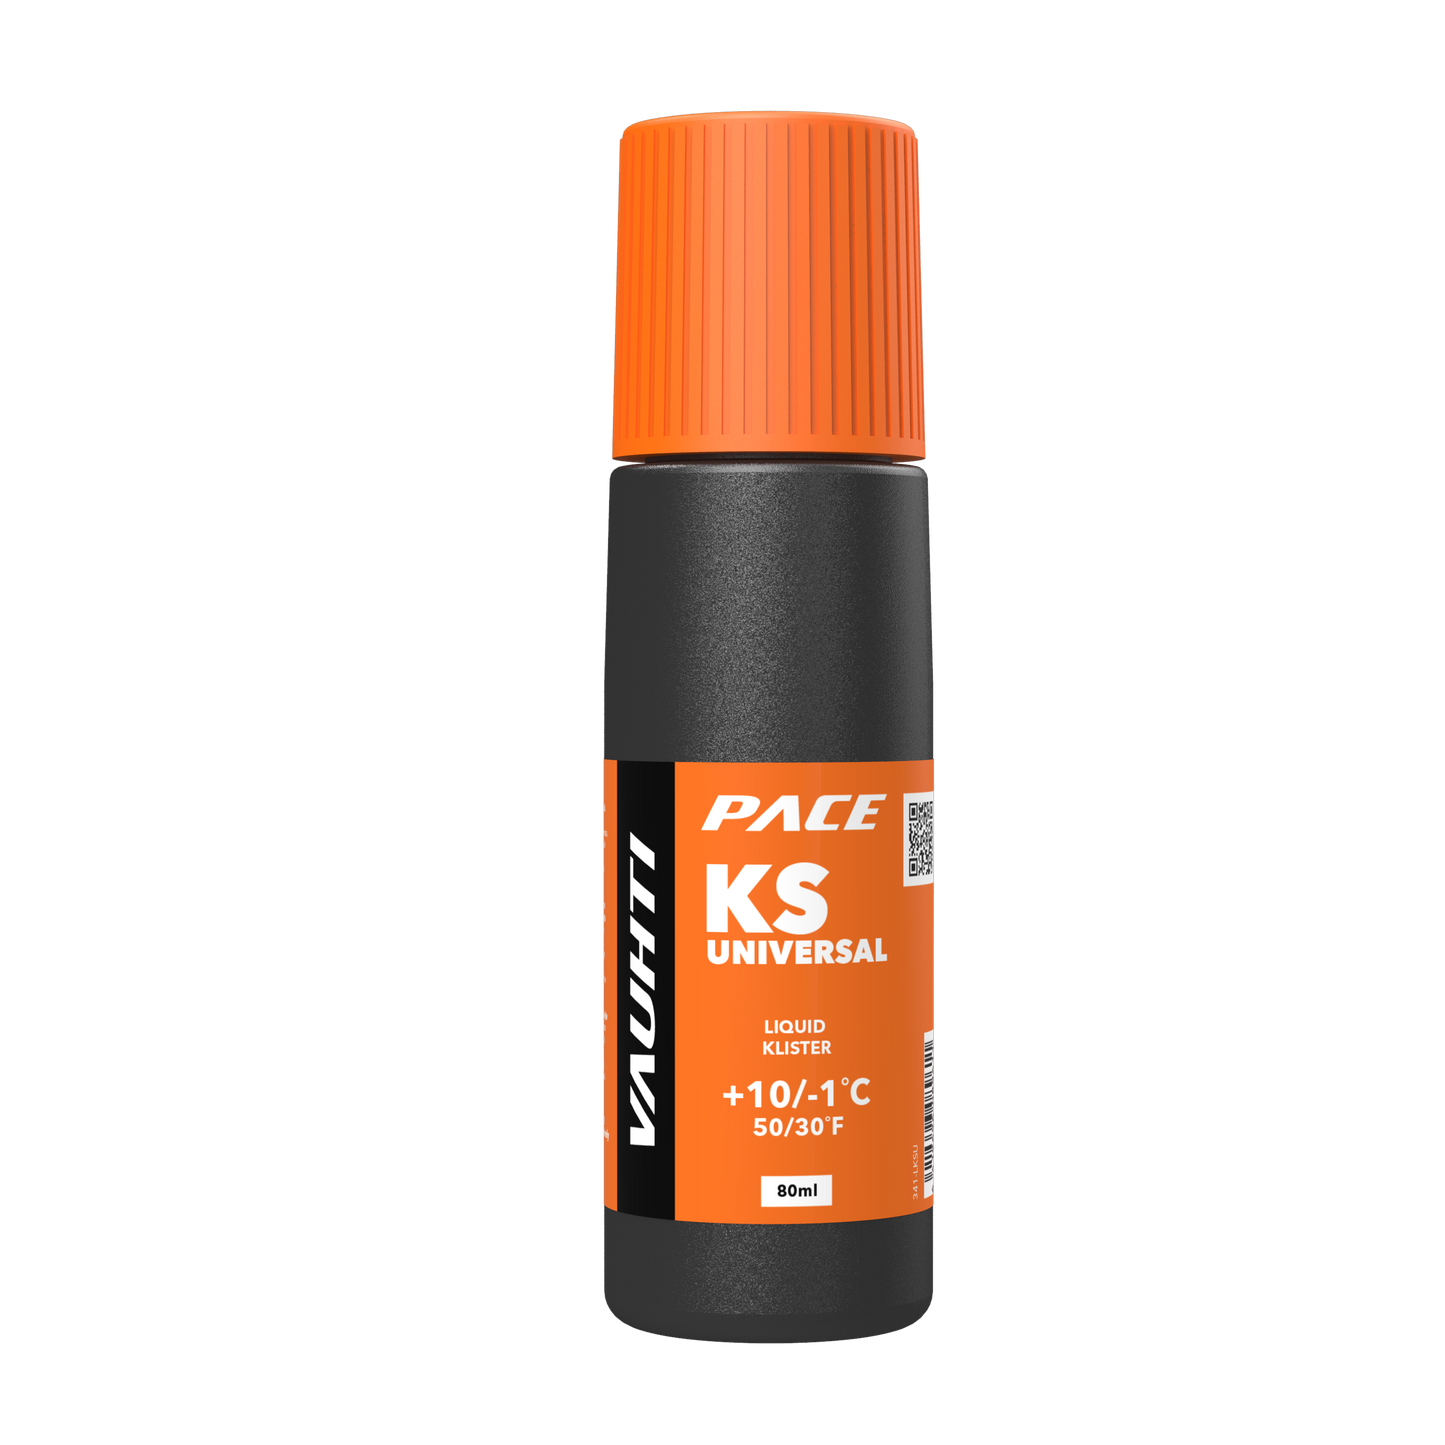 A liquid universal klister for damp to wet snow.